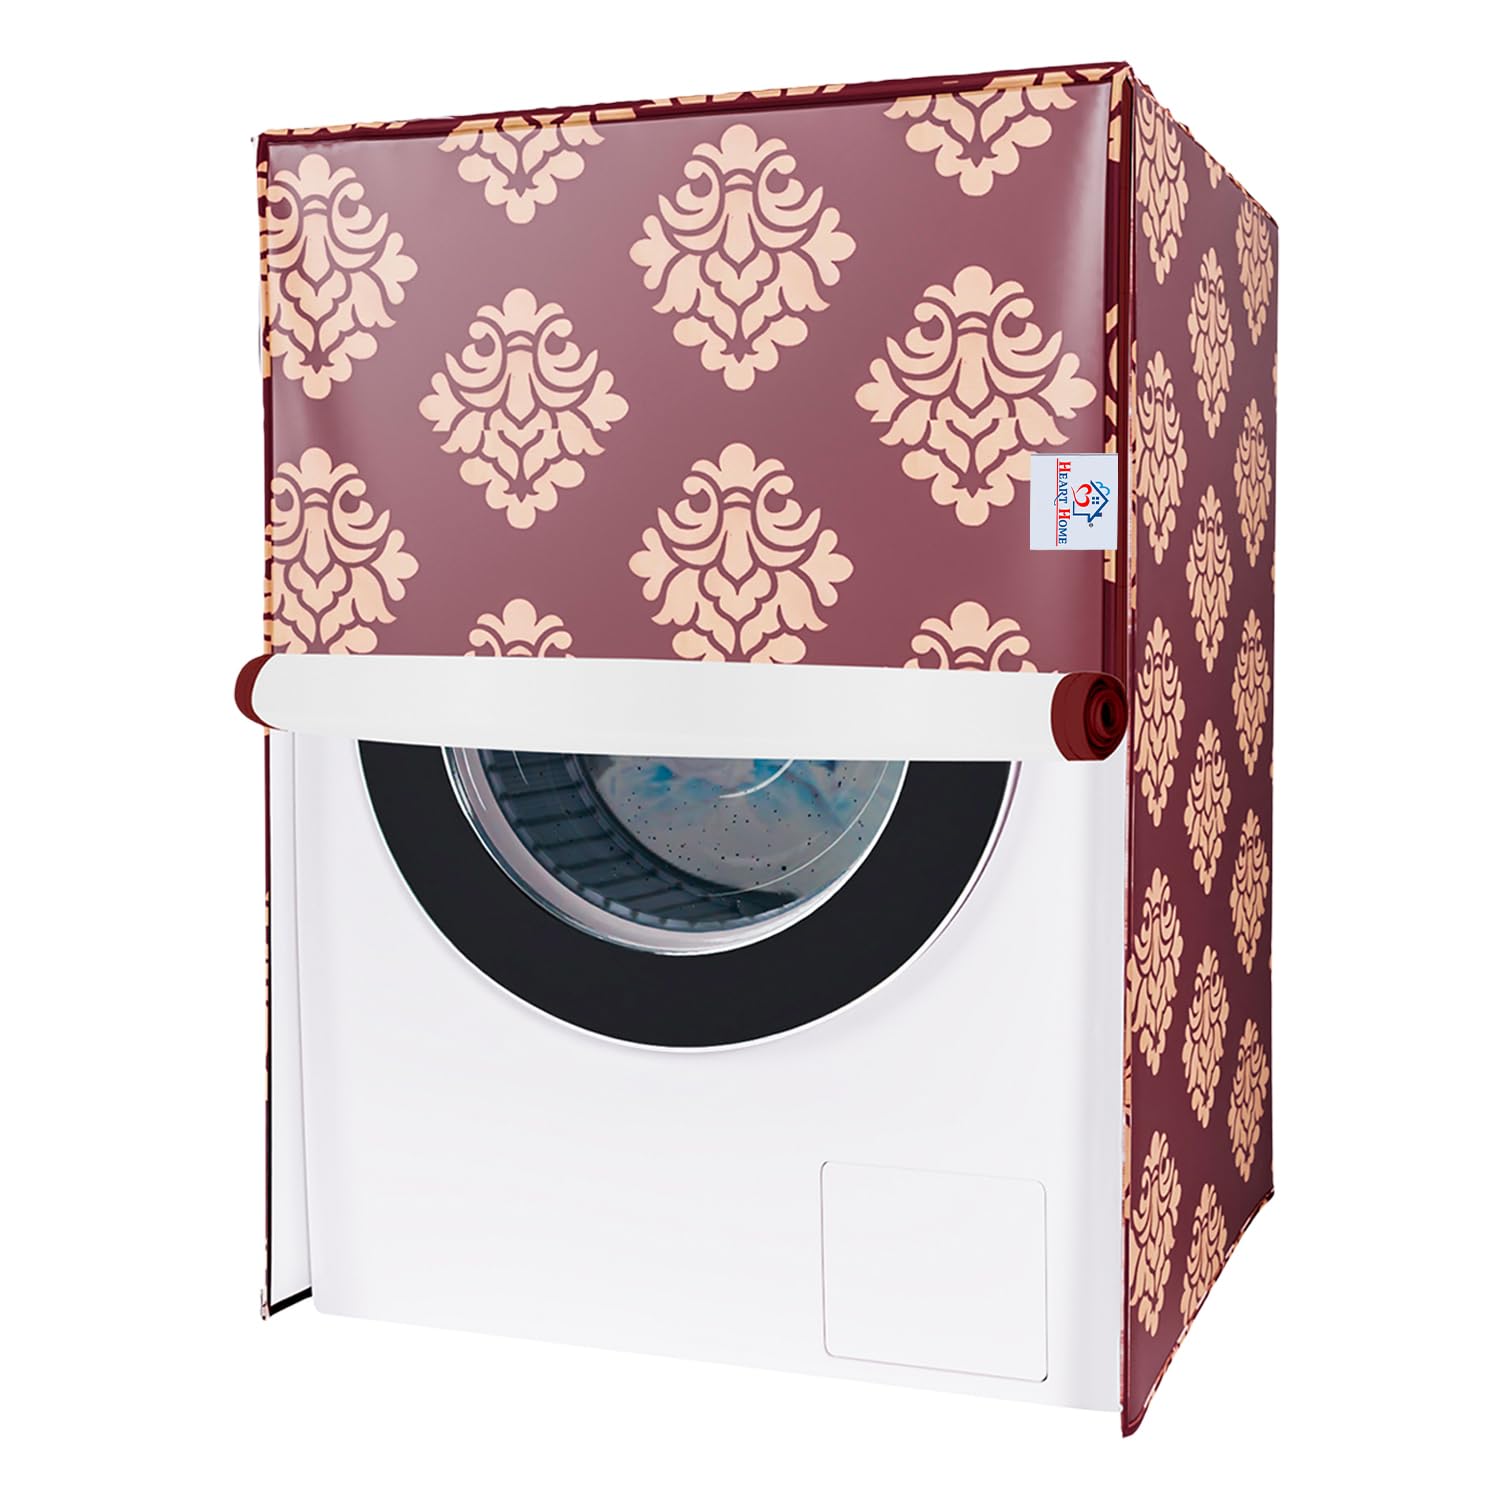 1pc Polyester Washing Machine Cover, Modern Black Washer And Dryer Cover  For The Top